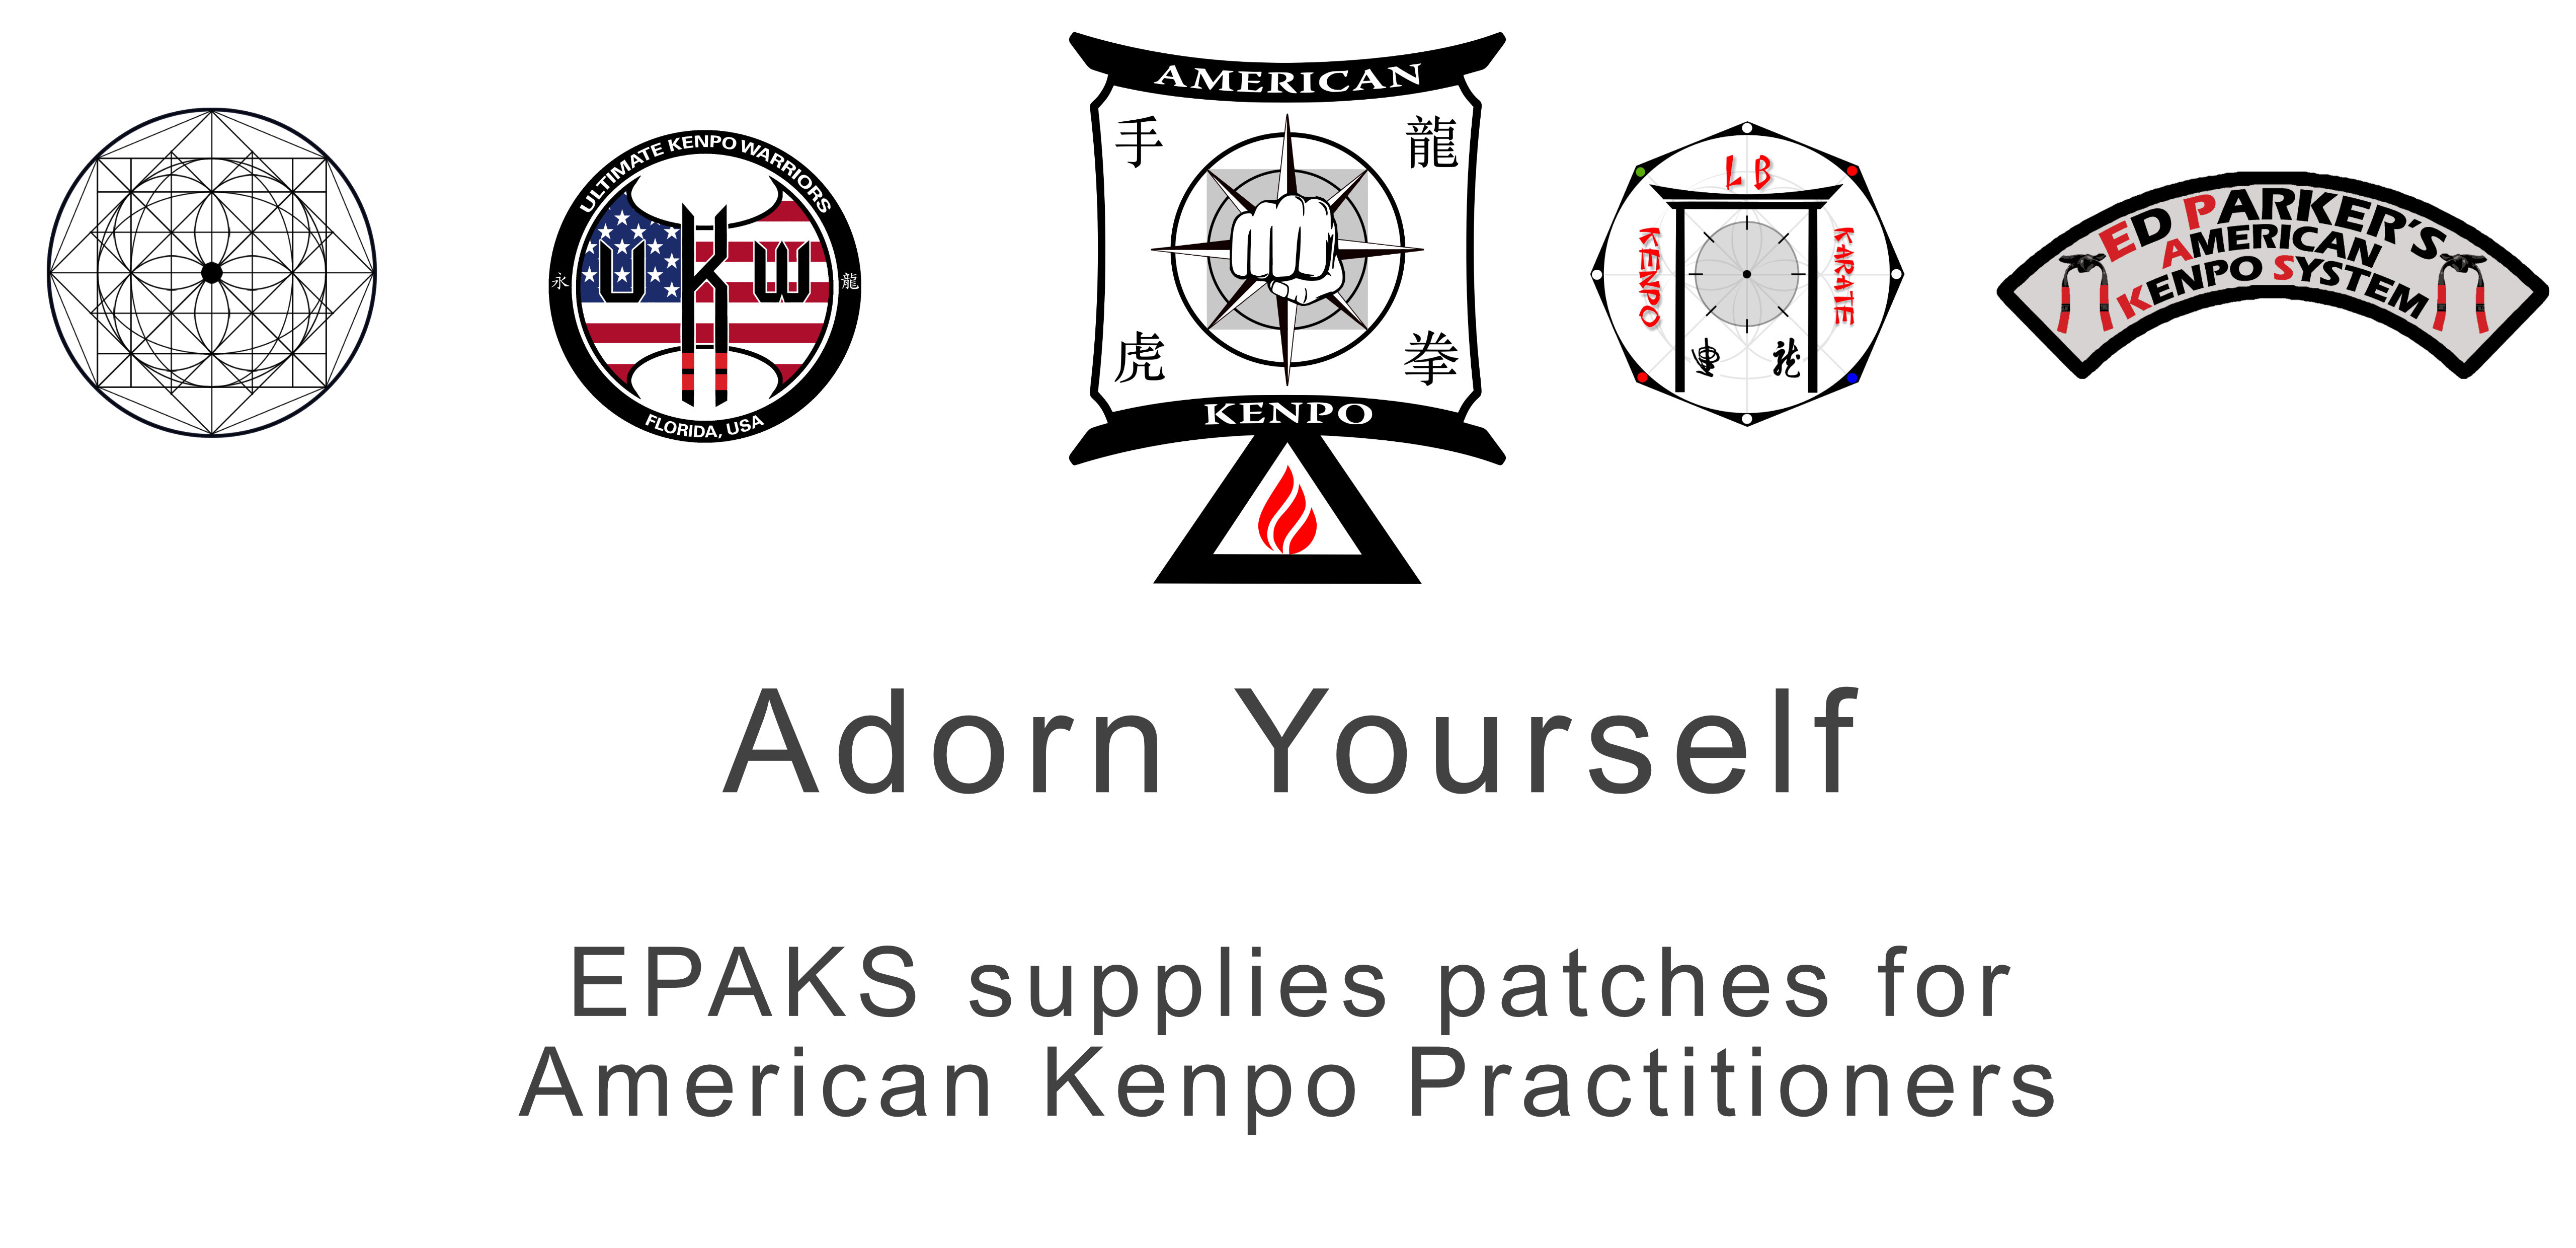 NEW SMALL SIZE ED PARKER KENPO KARATE CREST PATCH 3"H 